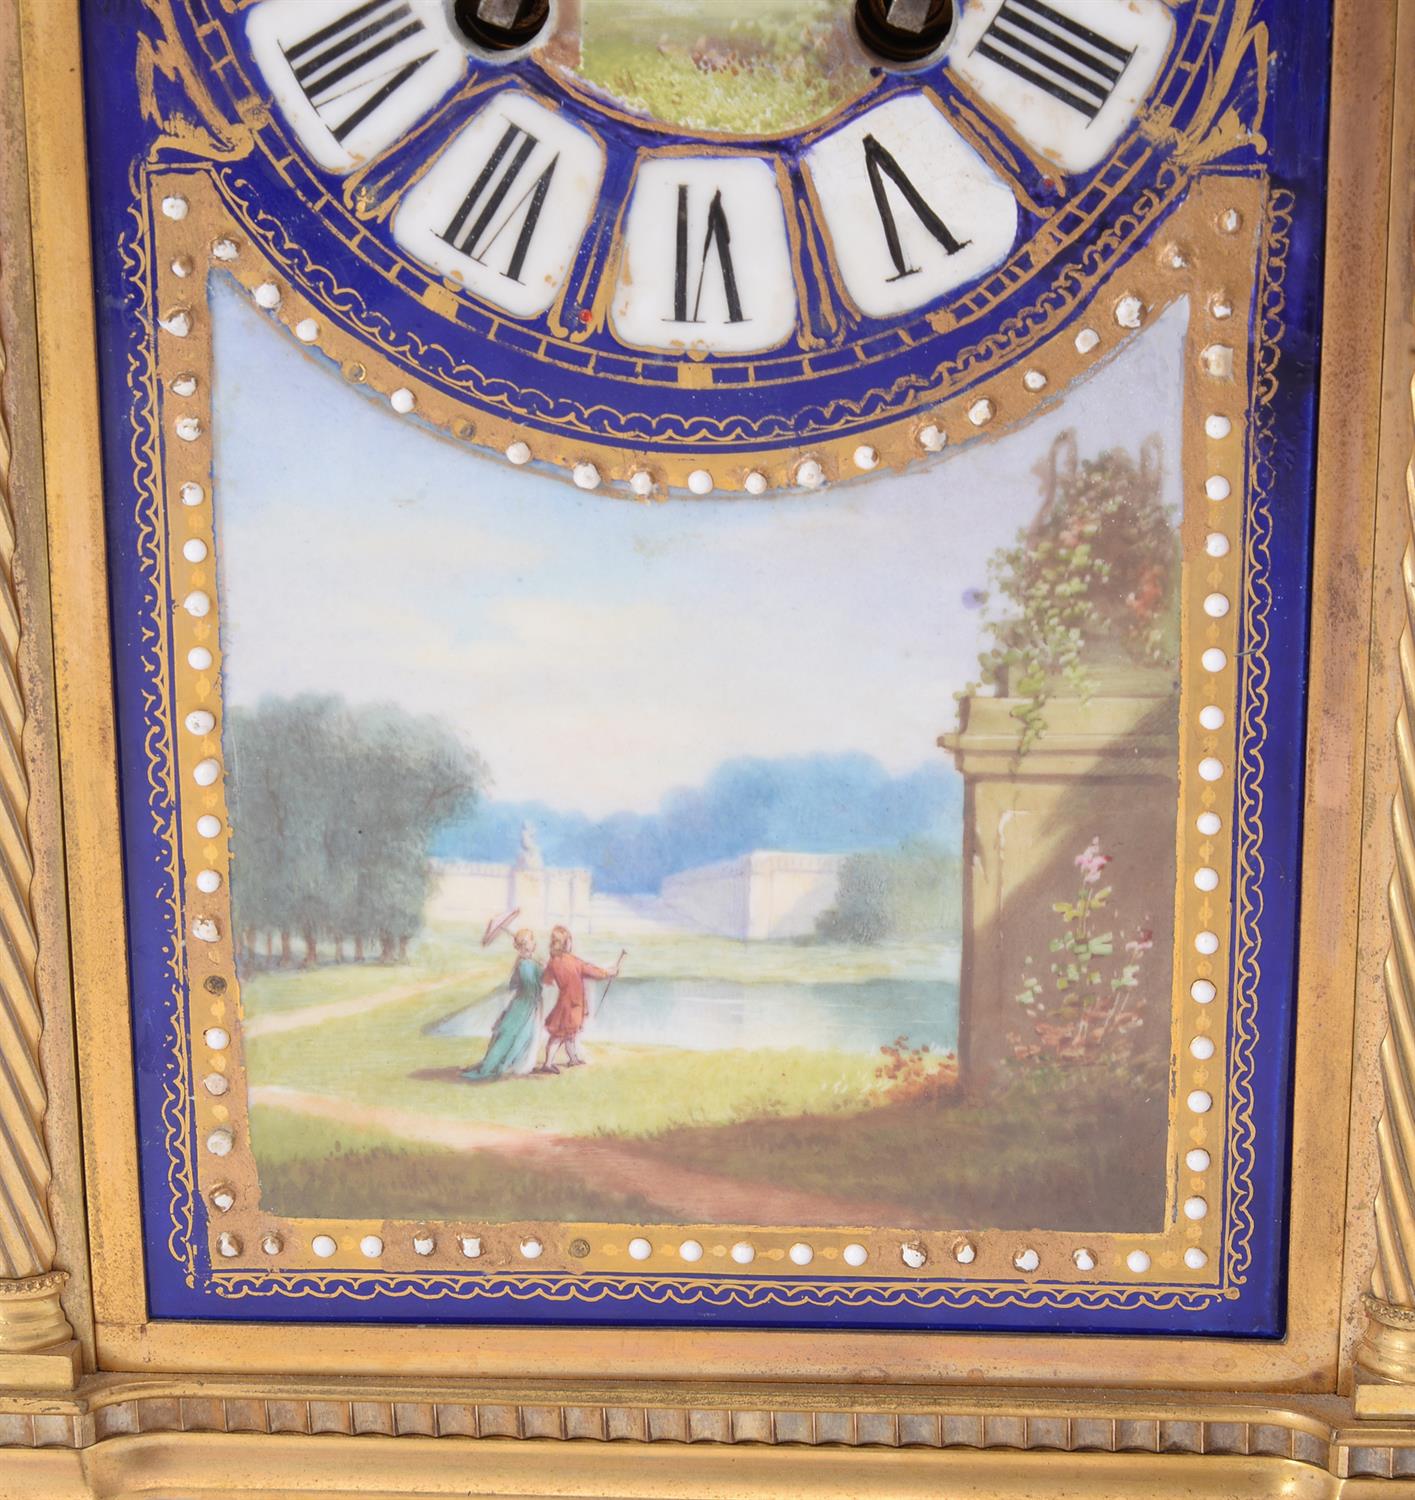 A French Sevres style porcelain and gilt metal library clock - Image 3 of 3